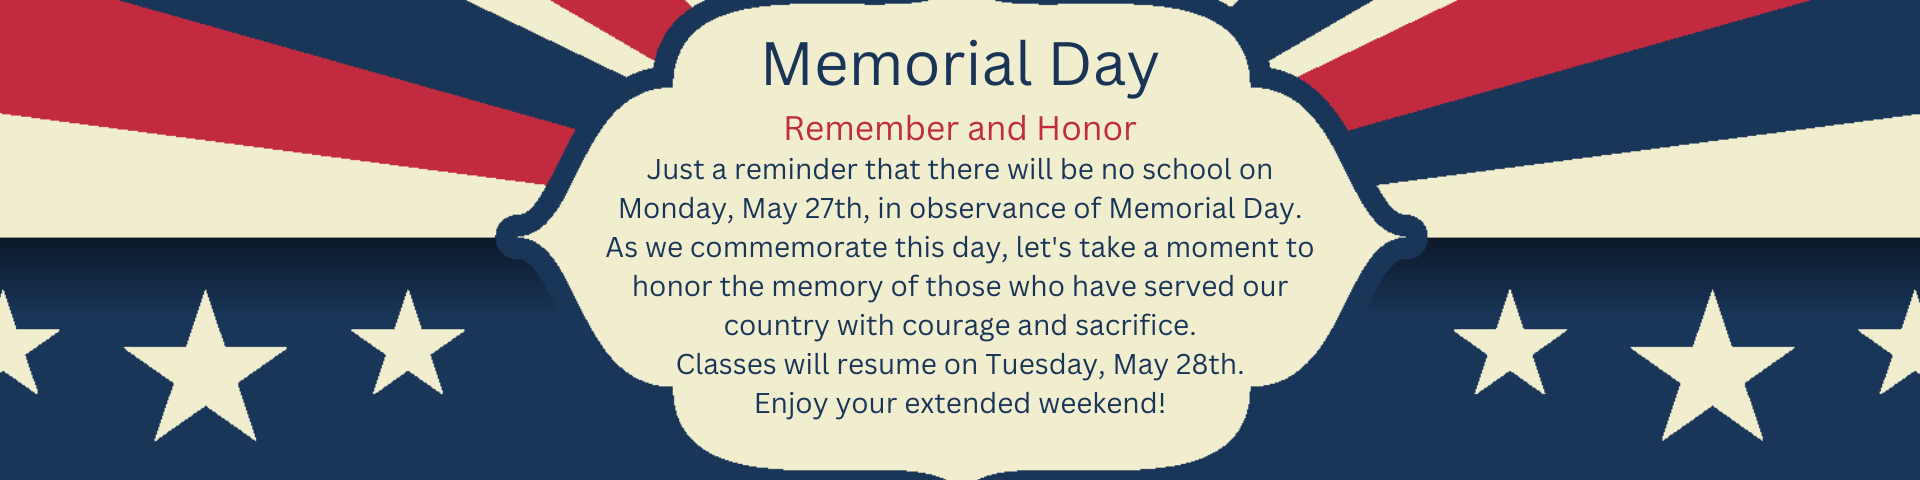 Memorial Day reminder - No School on Monday, May 27th